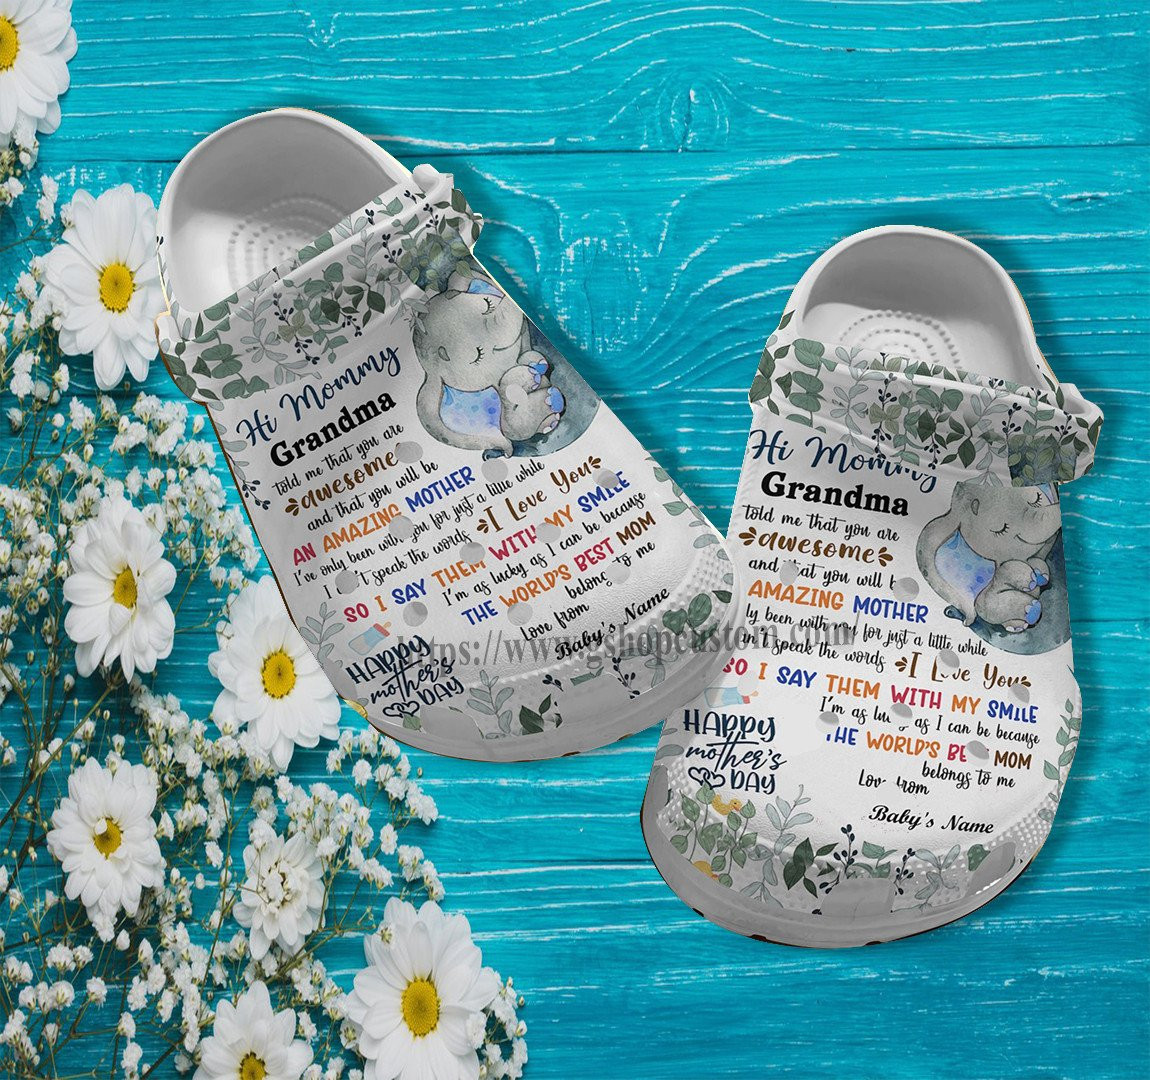 Elephant Grandma Letter Cuter Croc Shoes Gift Mother Day- Elephant Grandaughter Shoes Croc Clogs Customize Gift